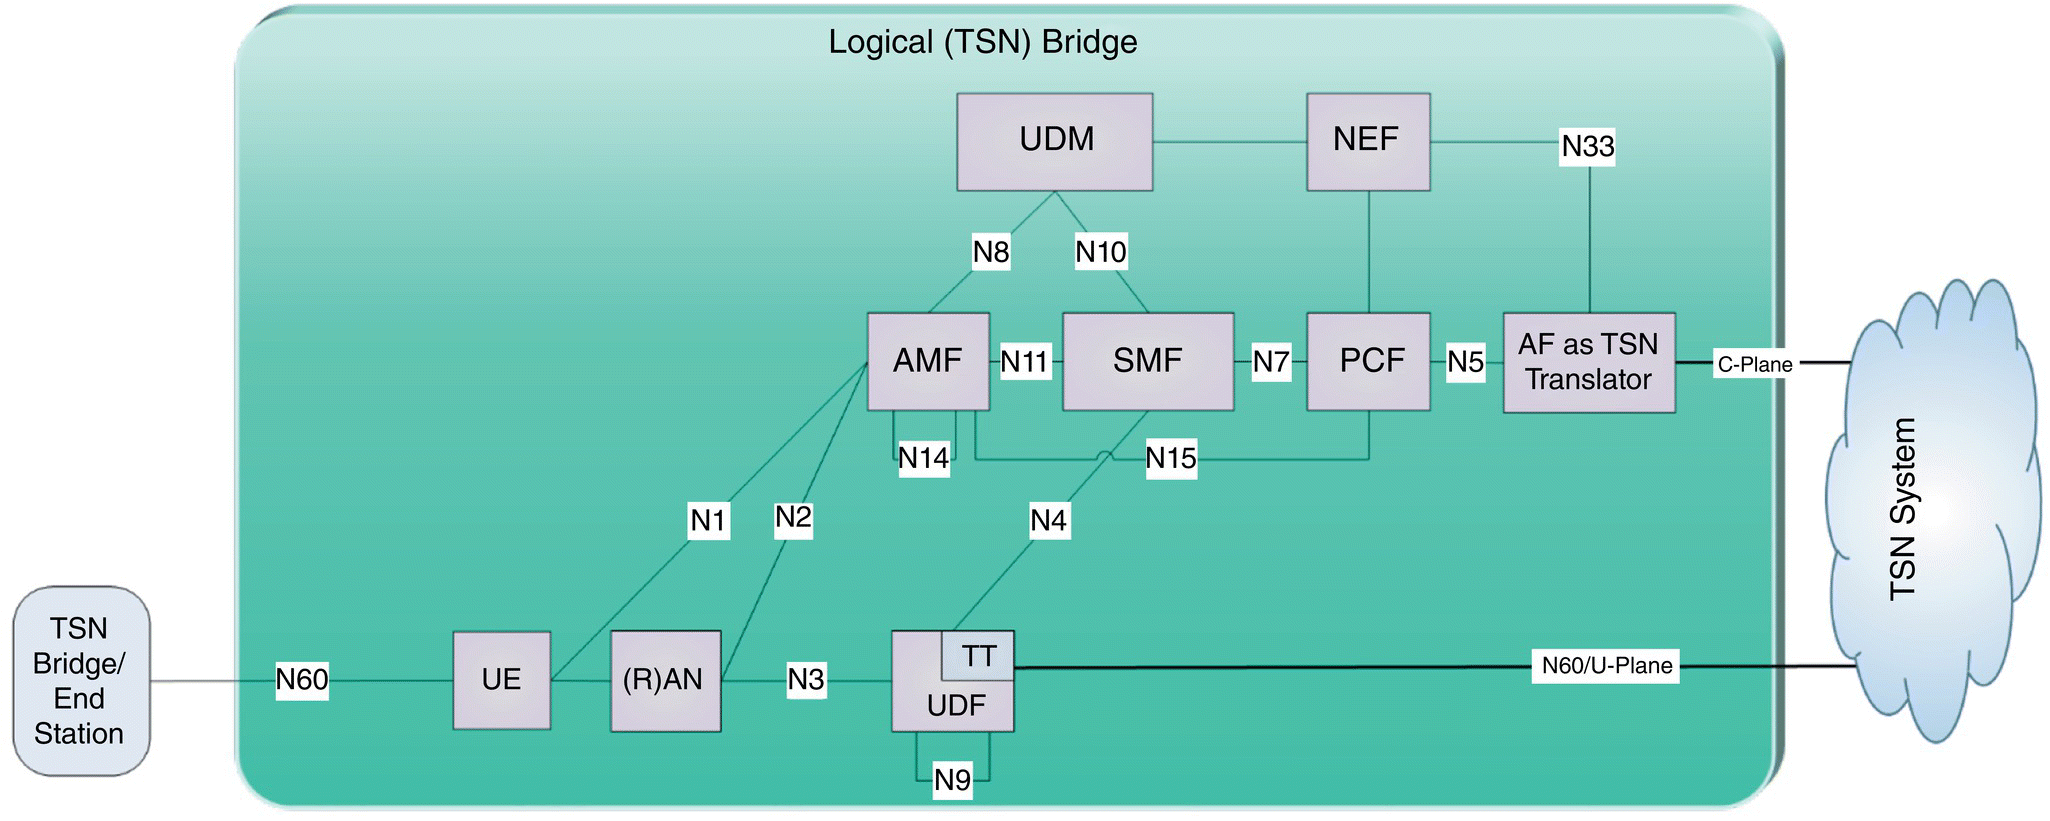 Schematic of TSN integration support with TSN translator (TT) as part of the UPF displaying a panel for logical (TSN) bridge with boxes for UE, (R)AN, AMF, UDM, NEF, PCF, etc. that are interconnected by lines.